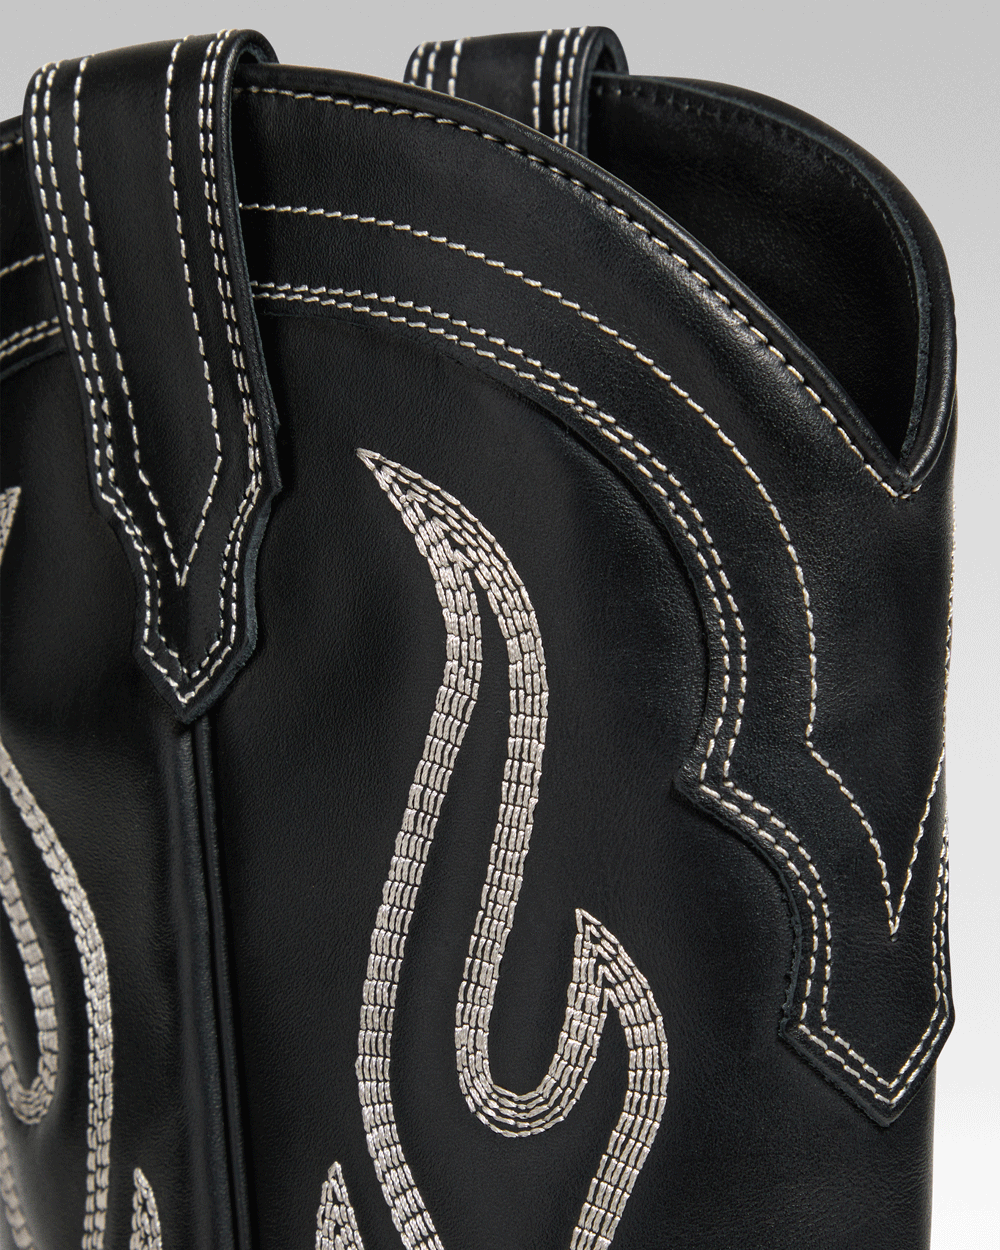 SANTA FE Women's Cowboy Boots in Black Calfskin | Off-White Embroidery